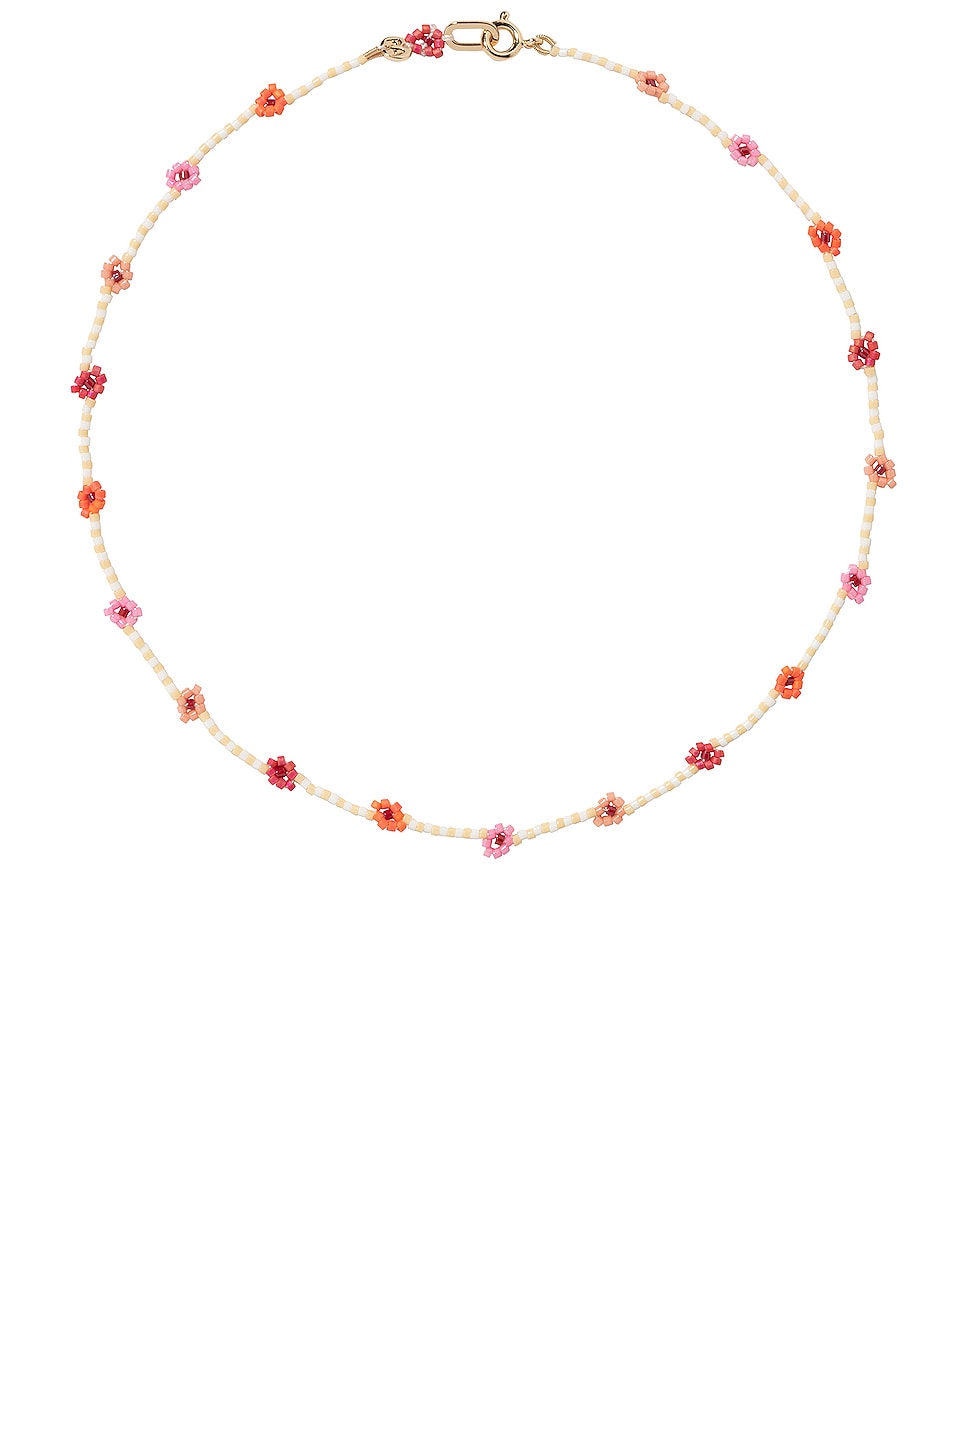 Image 1 of Roxanne Assoulin For Fwrd Daisy Necklaces in Pink